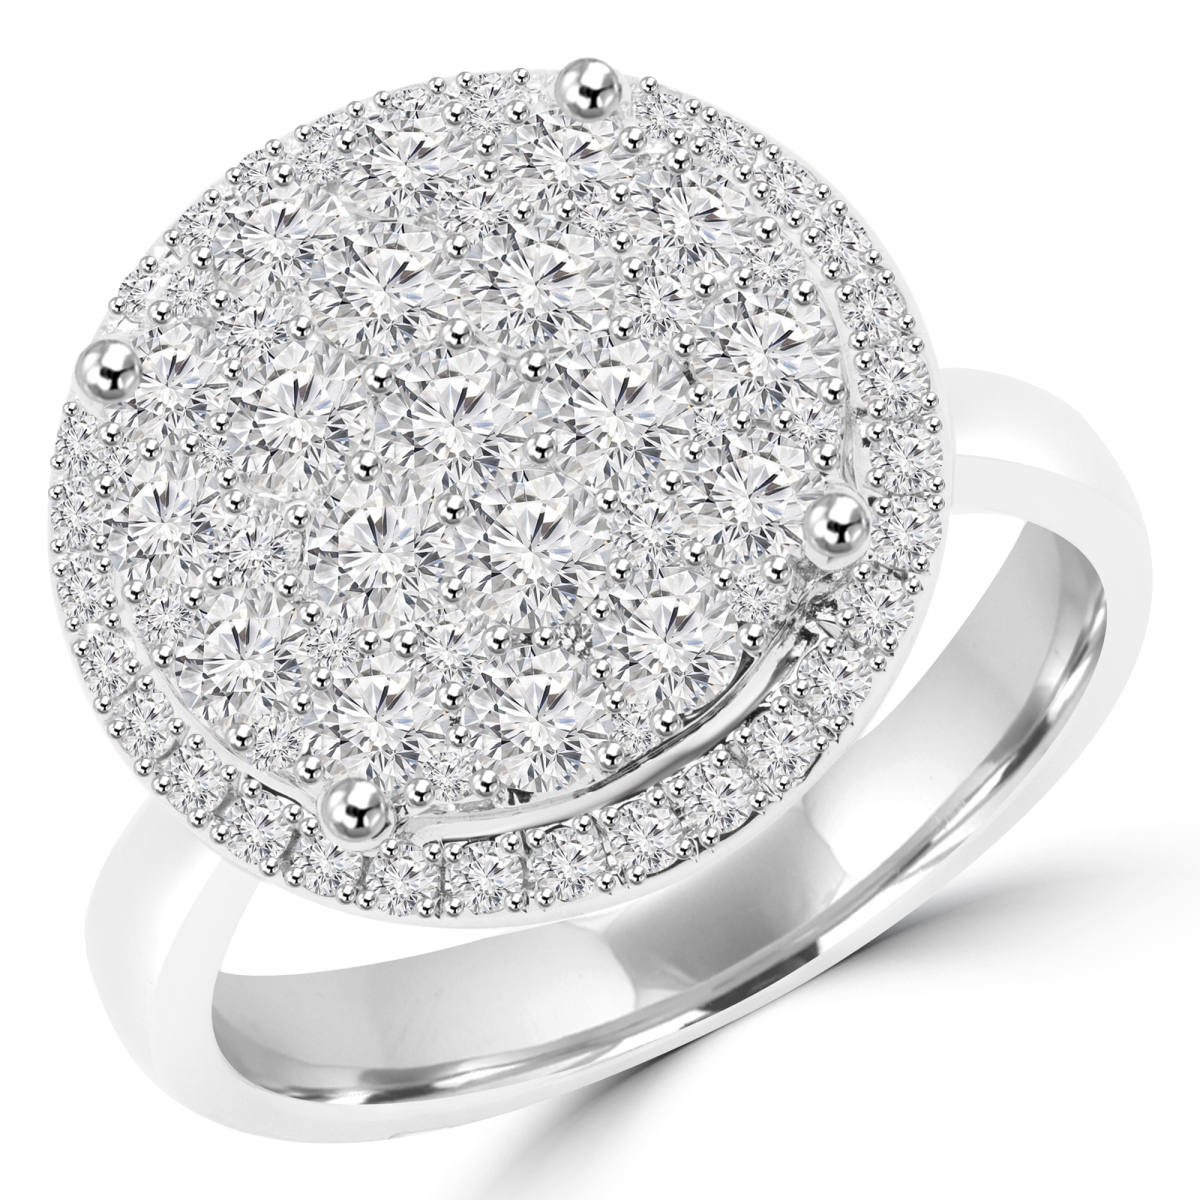 MD160293-3 1.5 CTW Pave Set Diamond Cluster Fashion Engagement Ring in 18K White Gold, Size 3 -  Majesty Diamonds